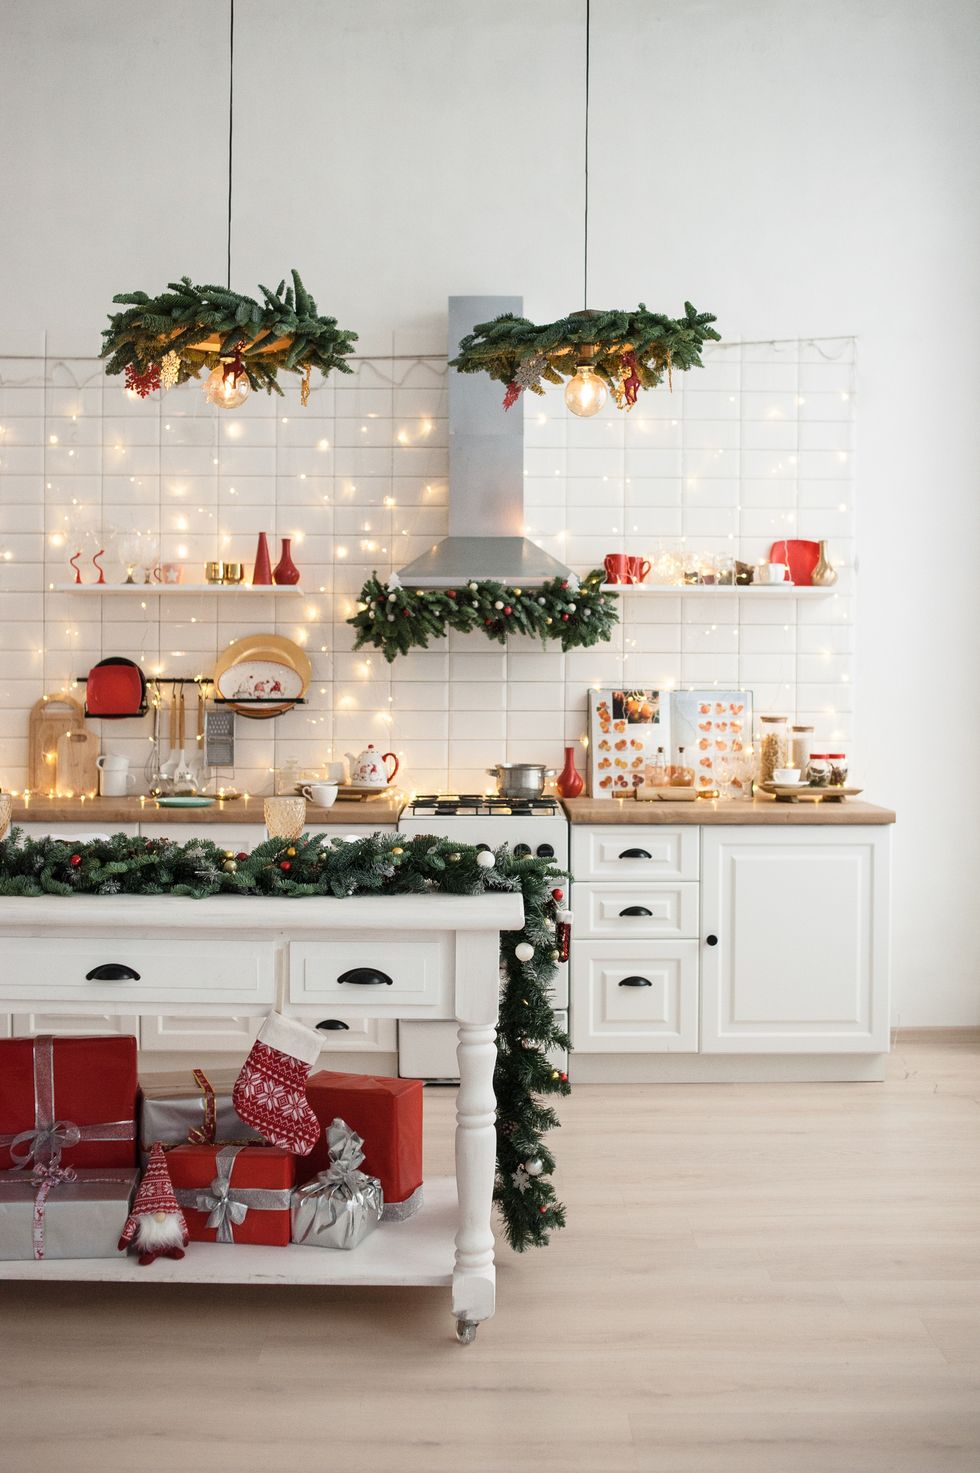 https://hips.hearstapps.com/hmg-prod/images/white-kitchen-interior-with-classic-christmas-decor-royalty-free-image-1699041735.jpg?crop=1xw:1xh;center,top&resize=980:*